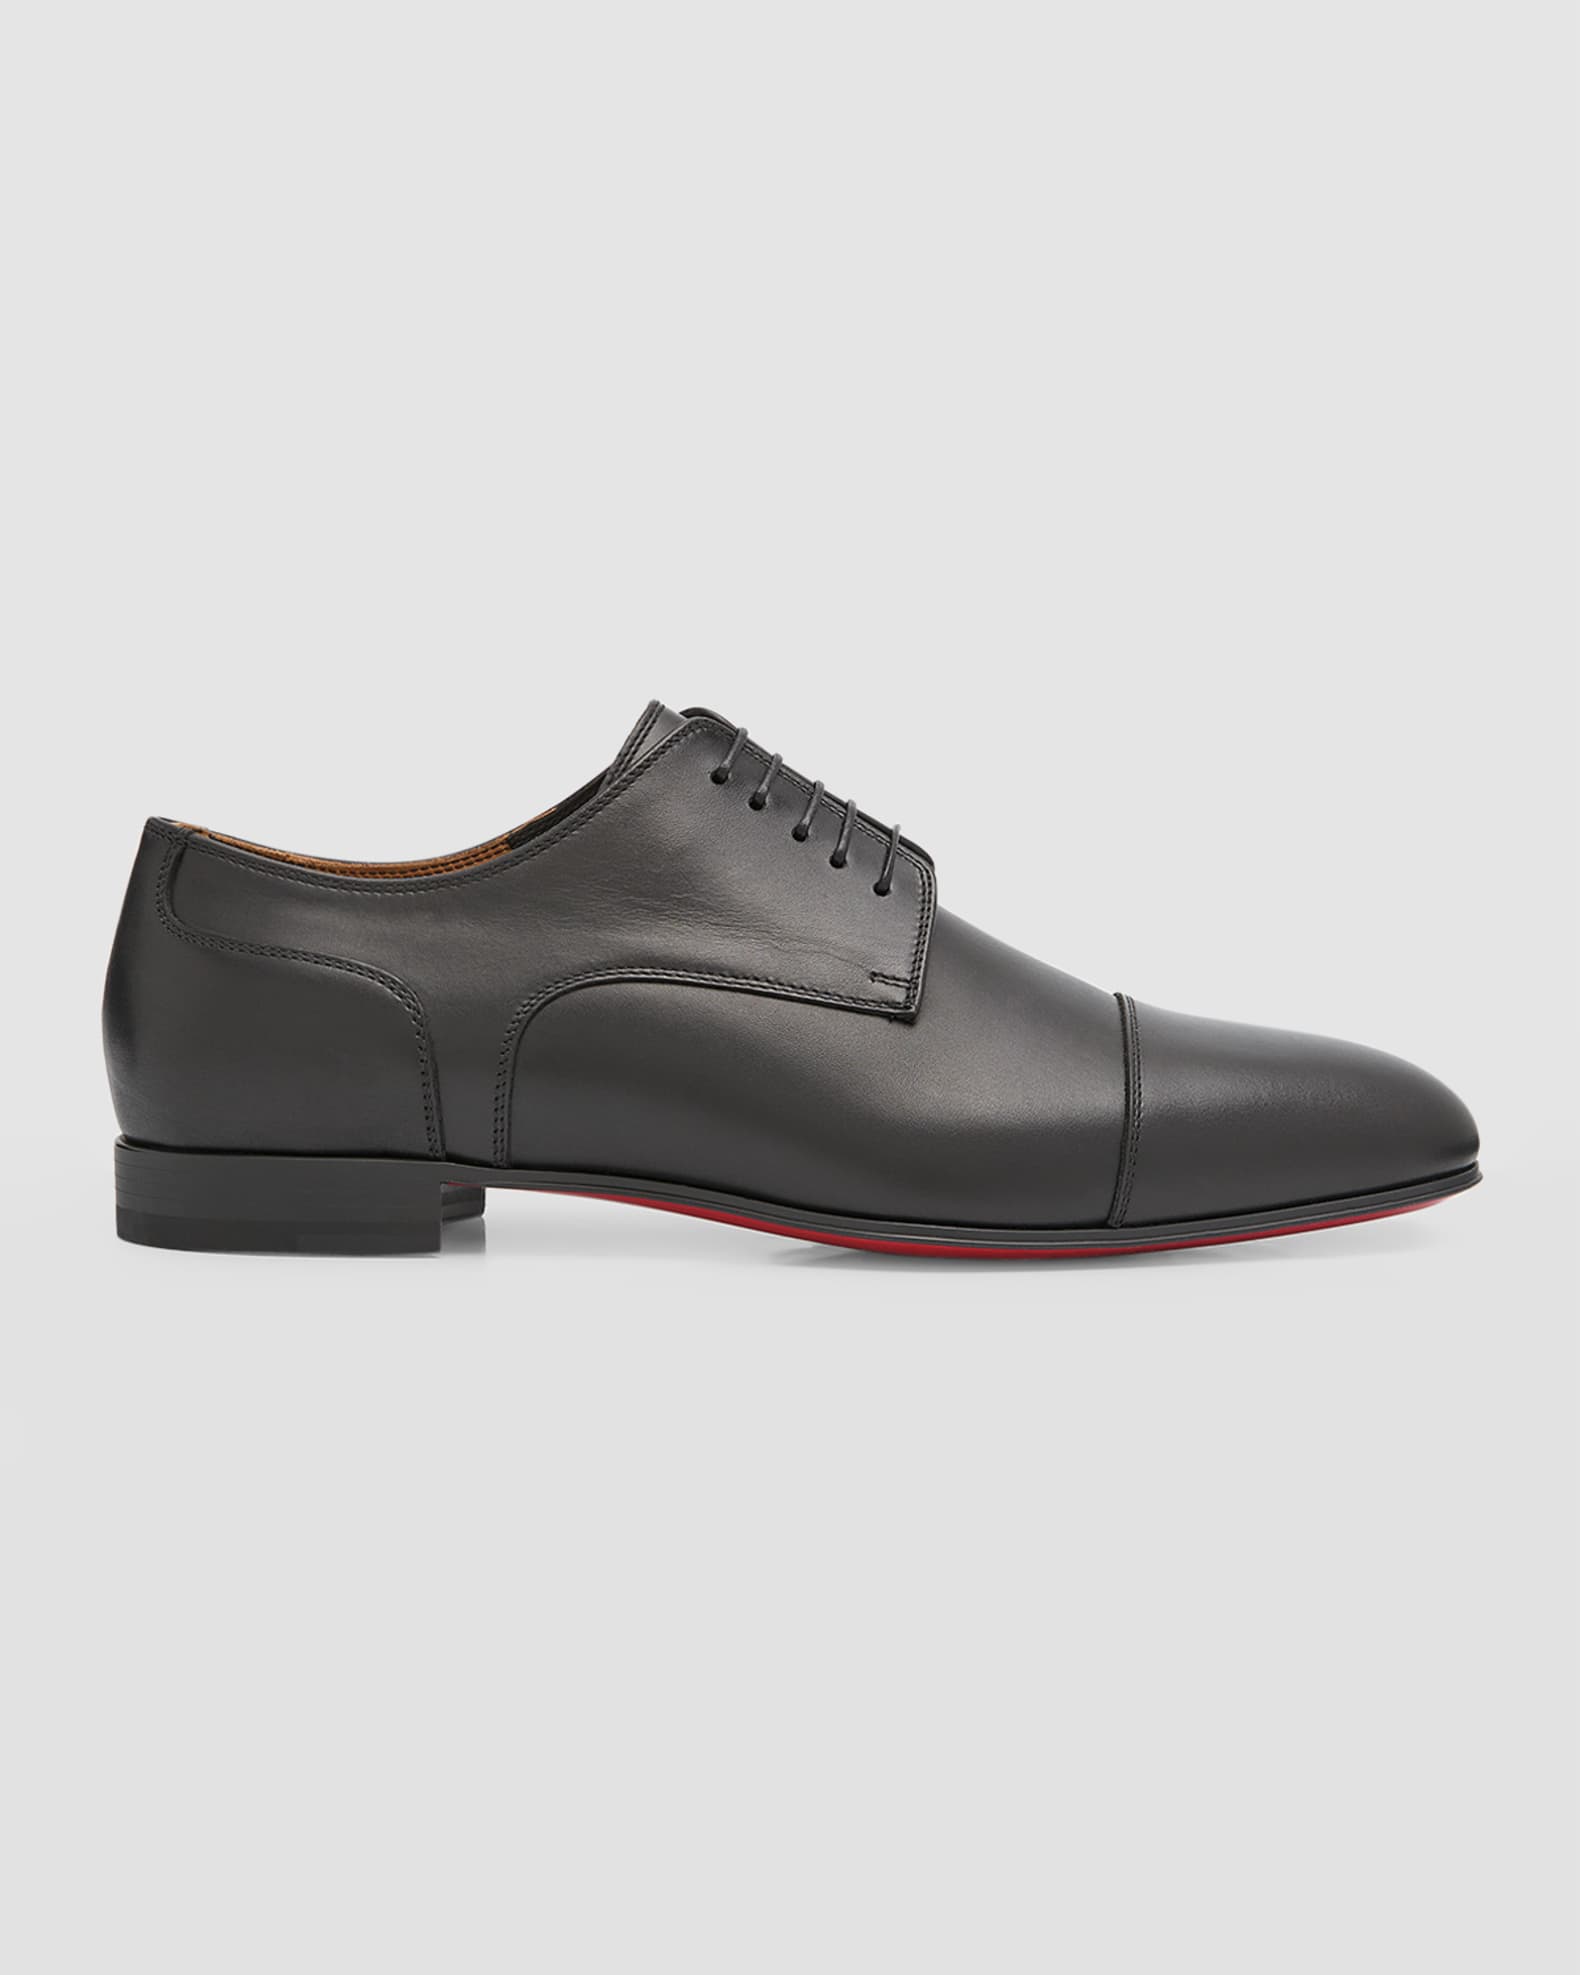 Christian Louboutin Men's Surcity Red-Sole Leather Derby Shoes | Neiman ...